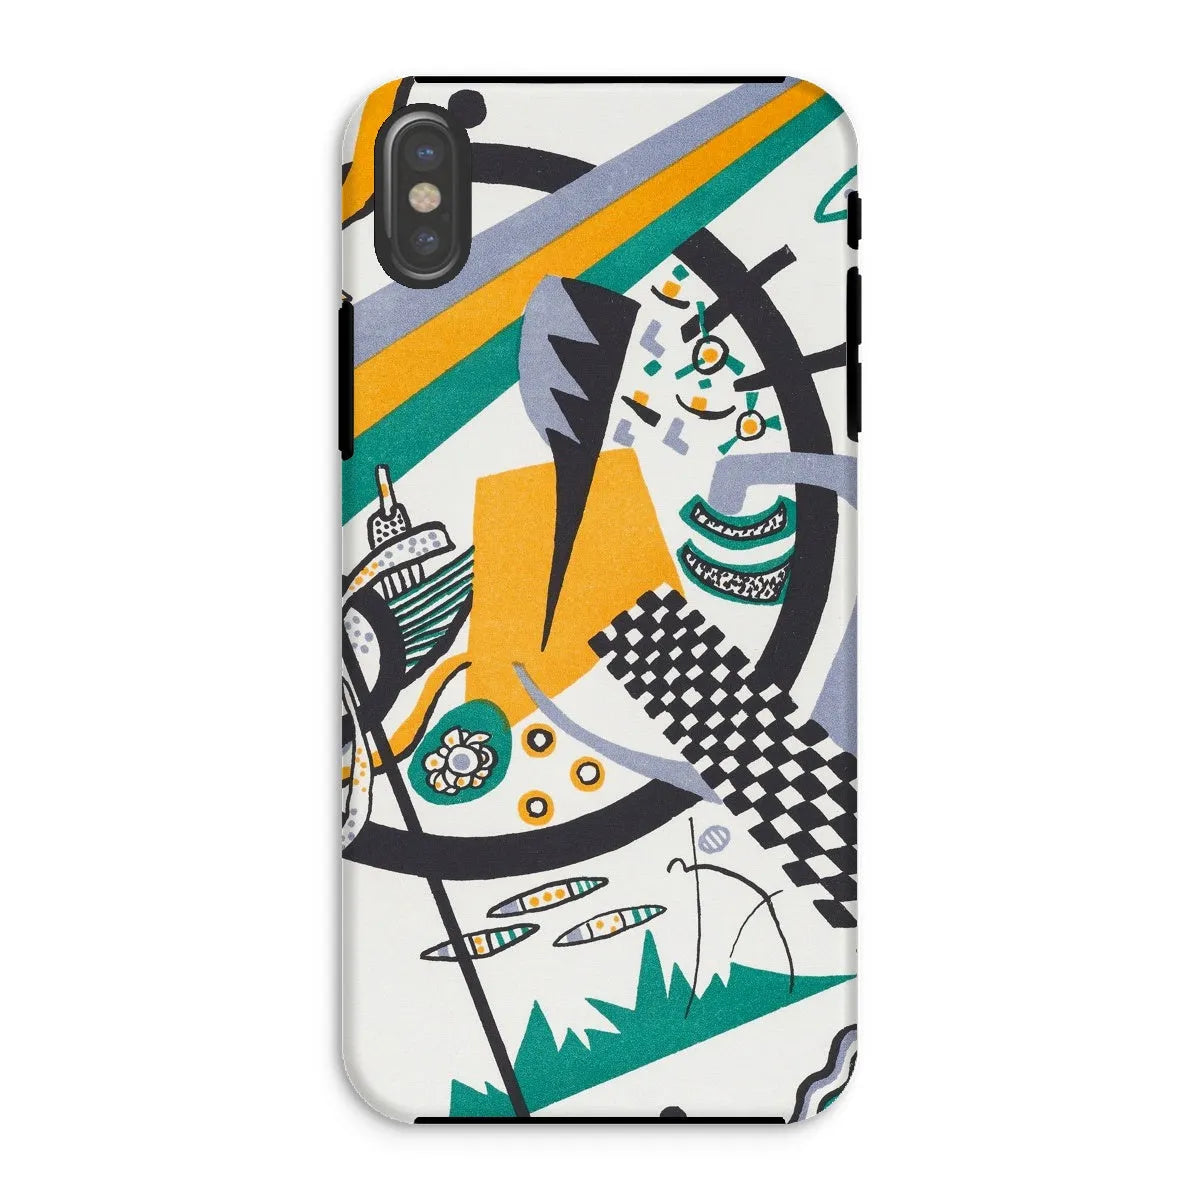 Small Worlds Iv - Expressionist Phone Case - Wassily Kandinsky - Iphone Xs / Matte - Mobile Phone Cases - Aesthetic Art